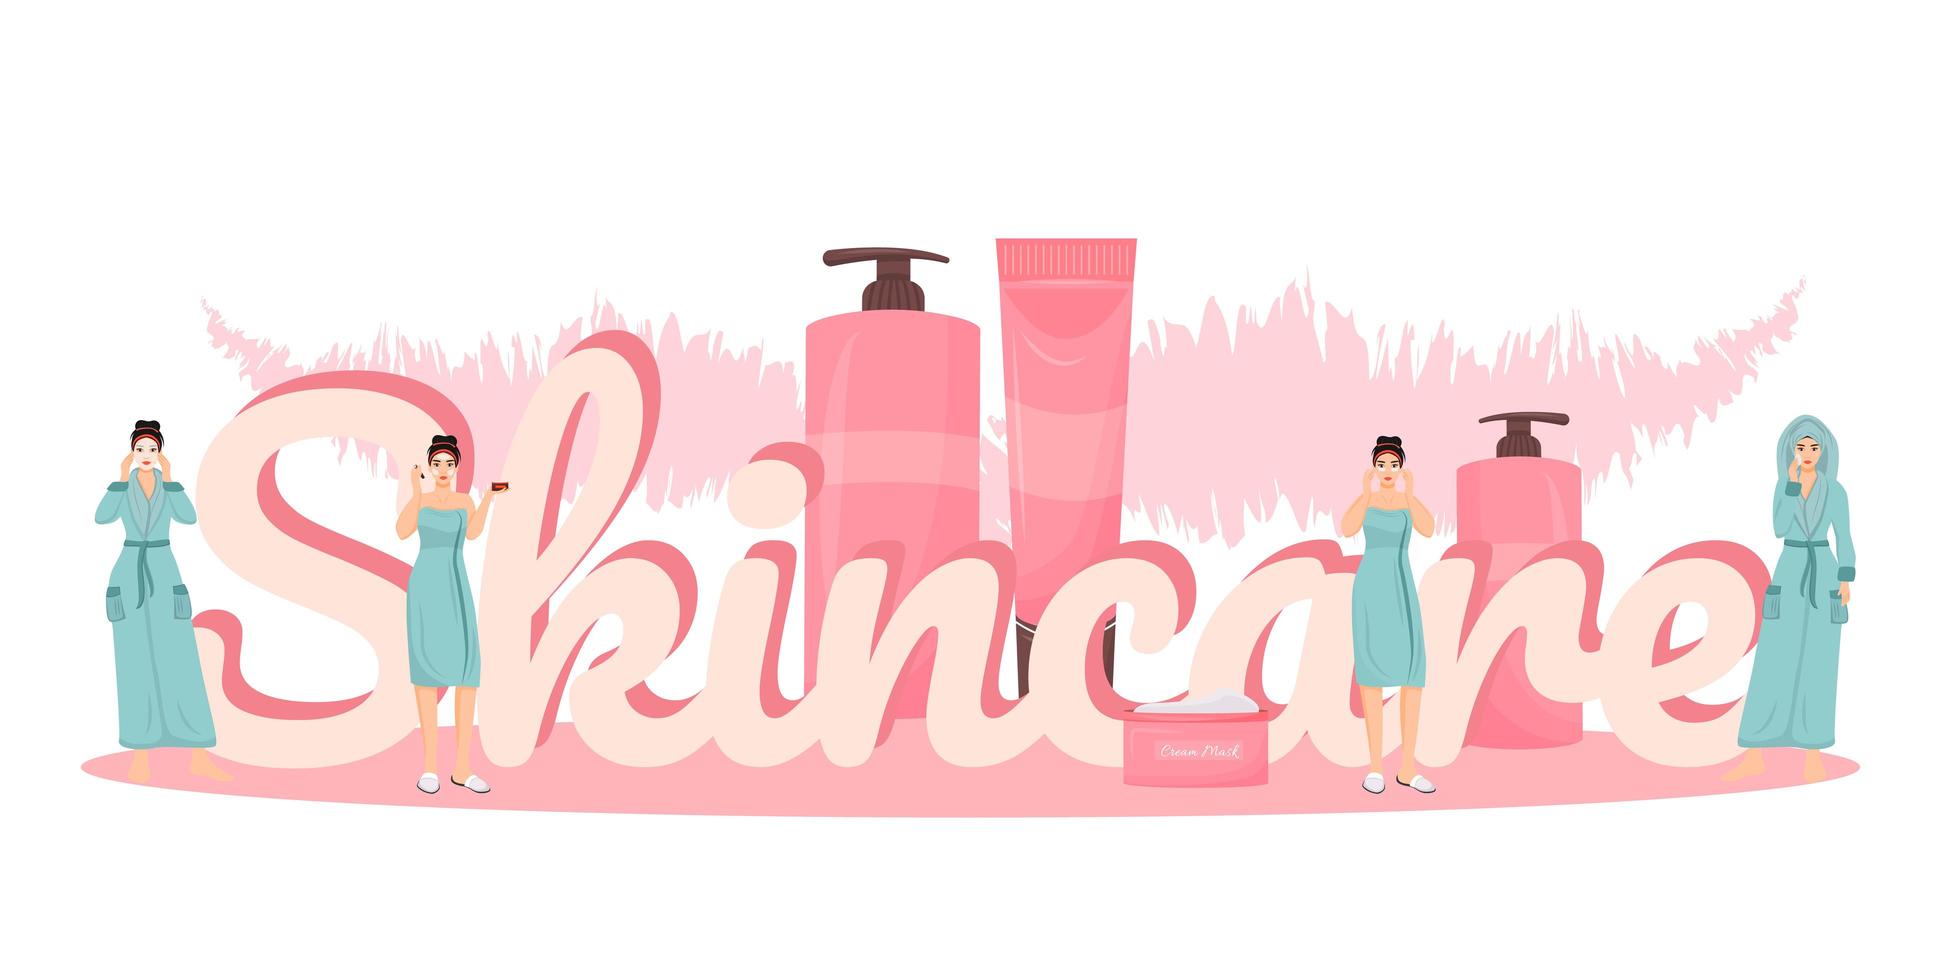 Skincare word banner vector